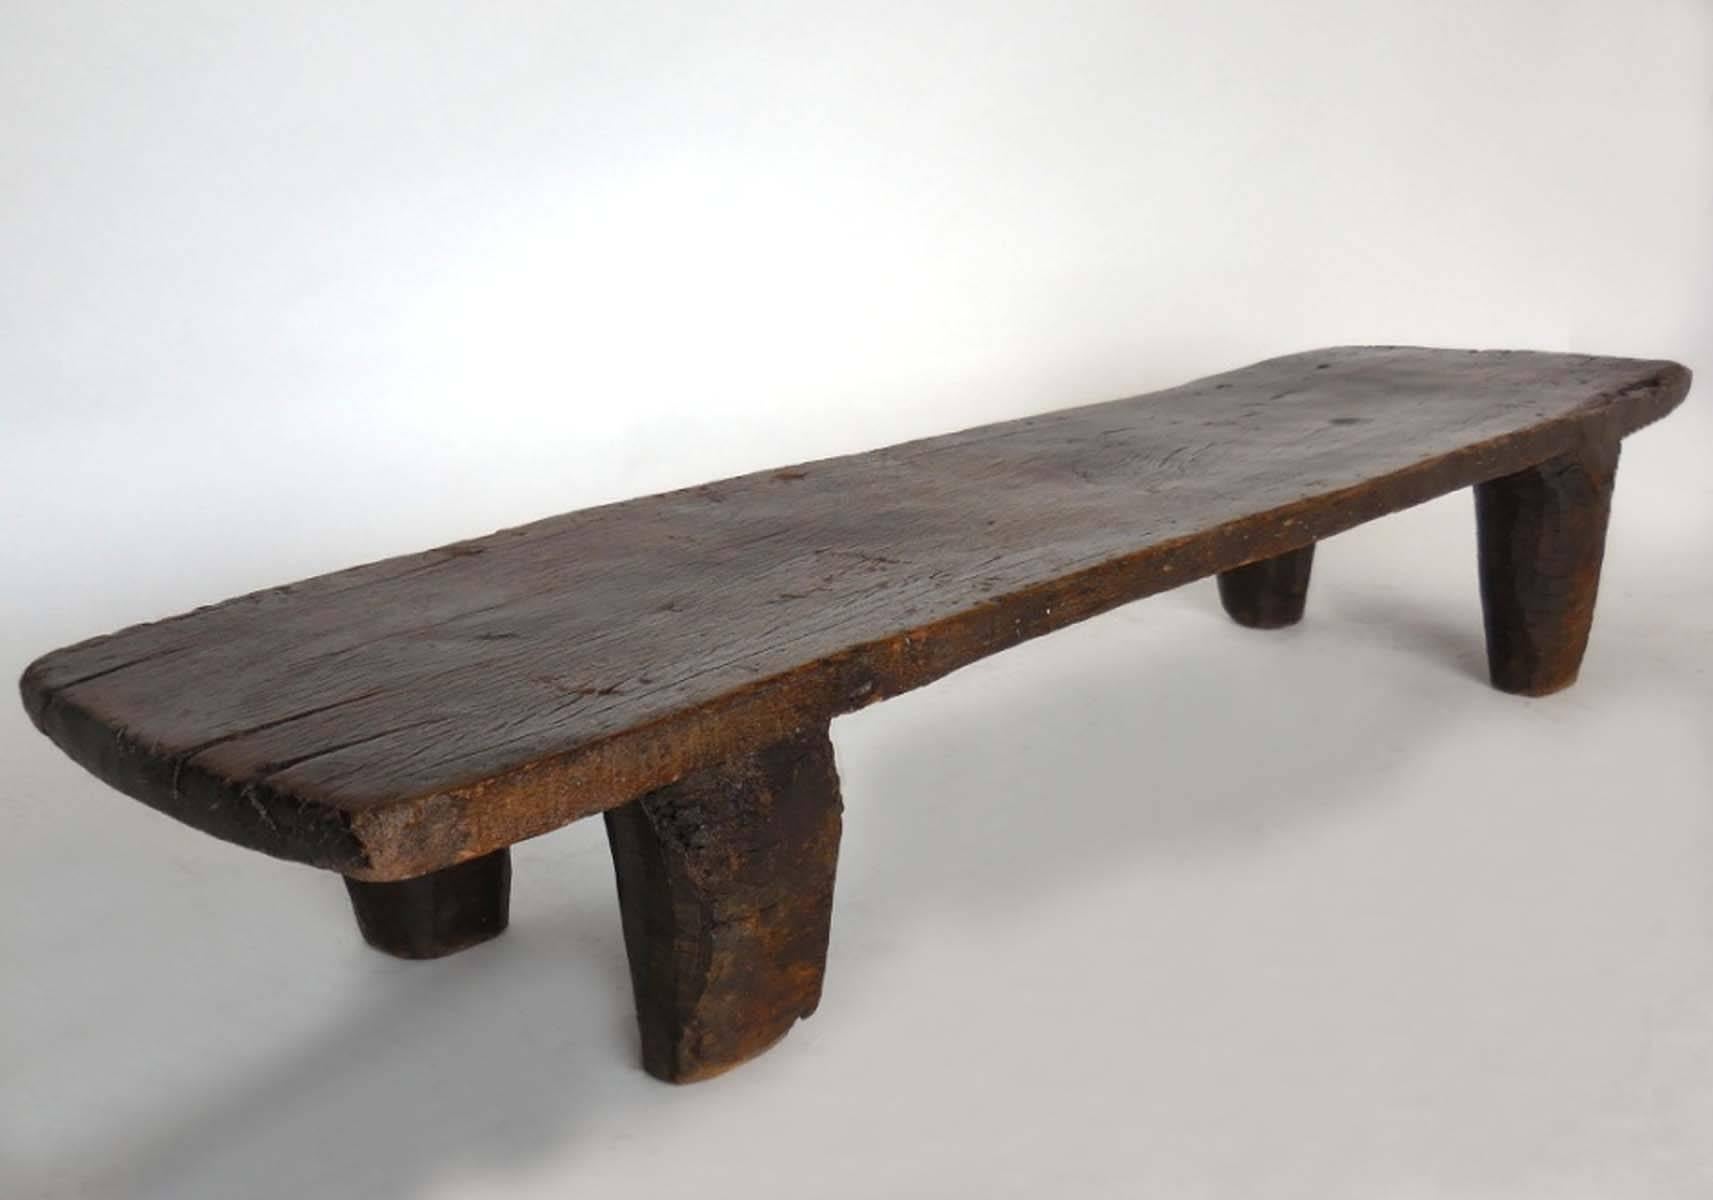 Nigerian Antique Wood Nupe Bench or Coffee Table